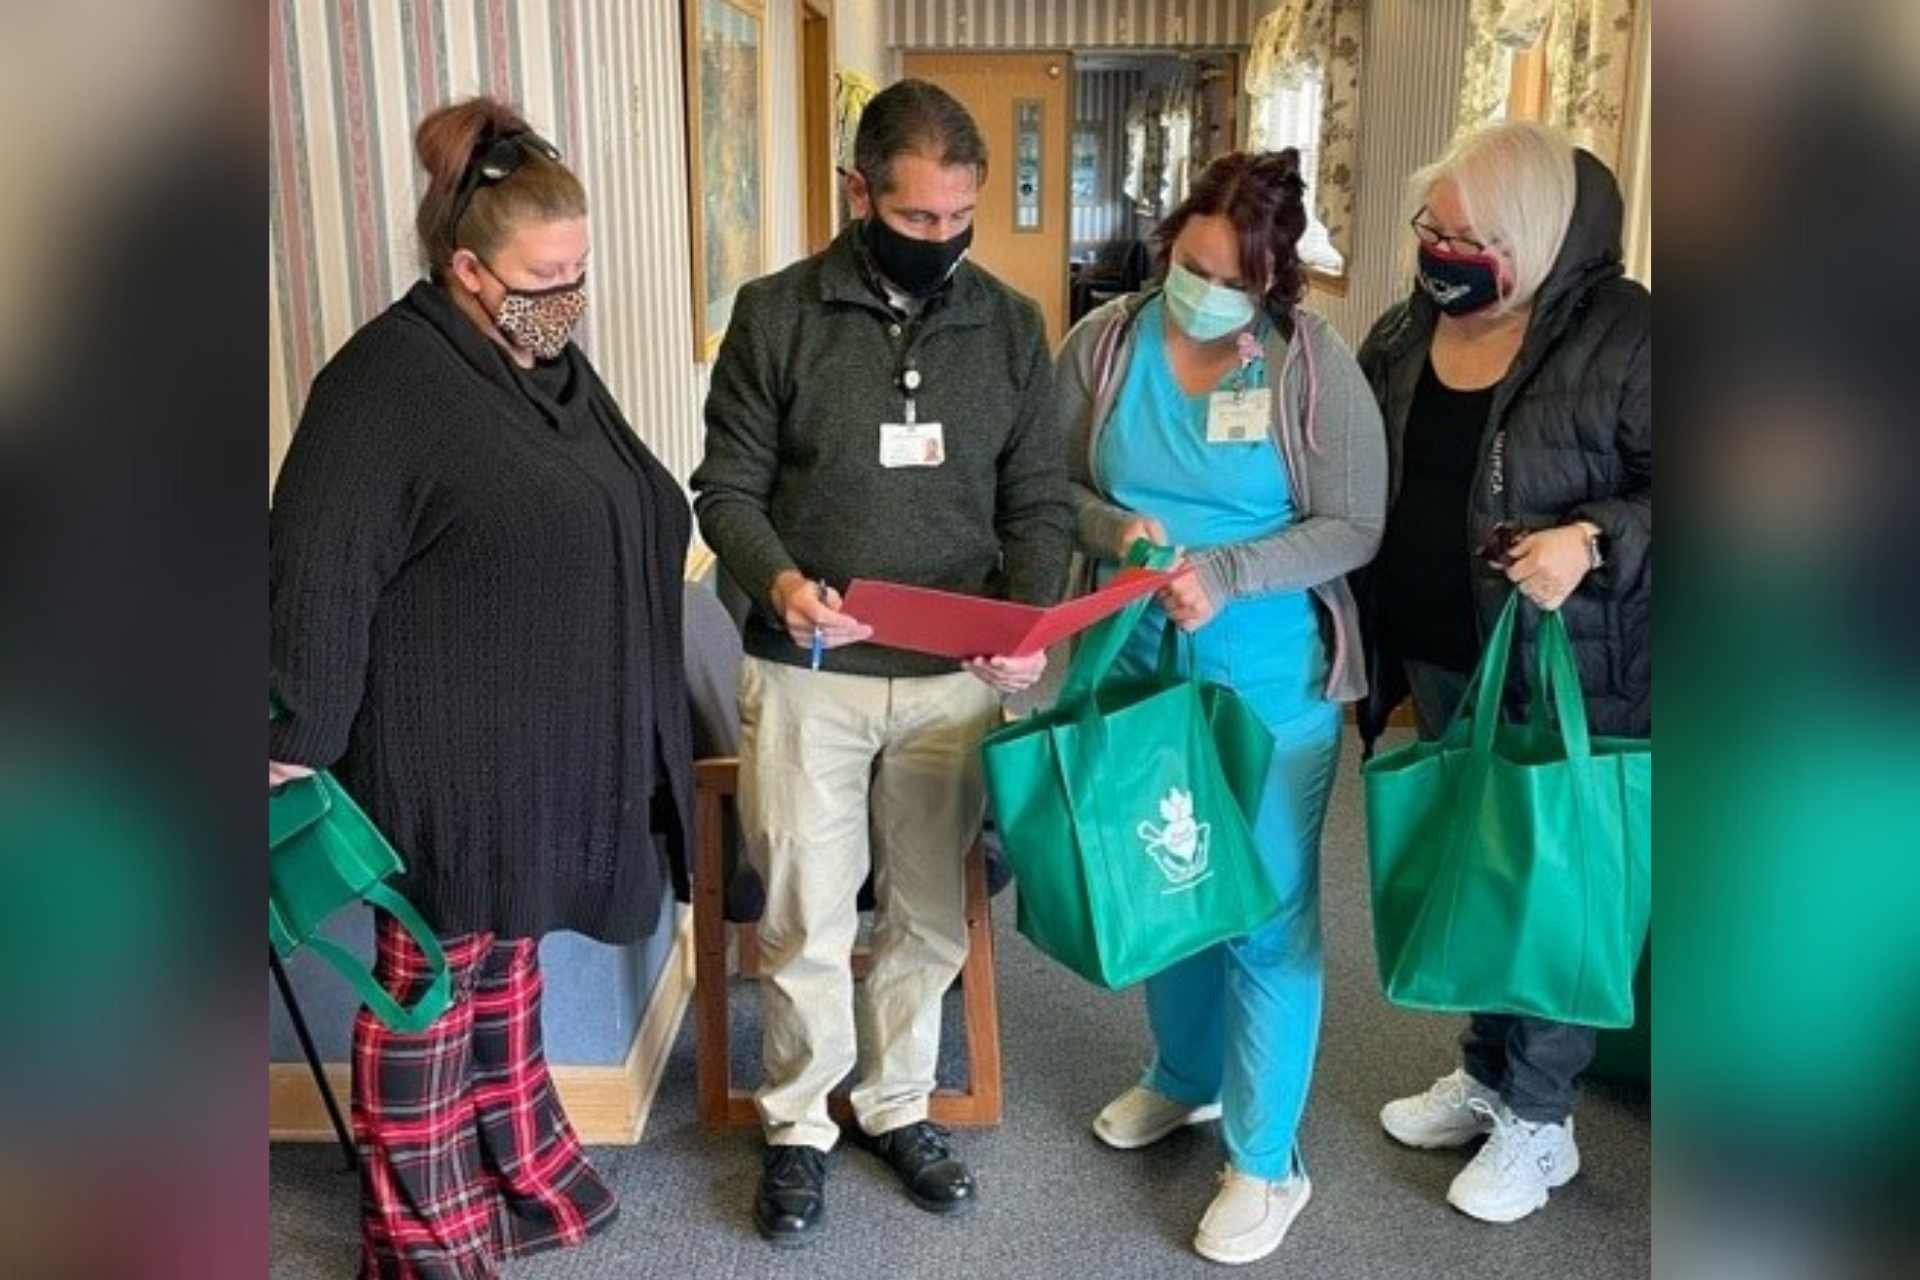 Each week Food Farmacy participants attend educational classes and receive fresh groceries for meal preparation. Patients meet with DHS Dietitian Jim Severino and a Population Health Nurse to review weekly healthy menus.